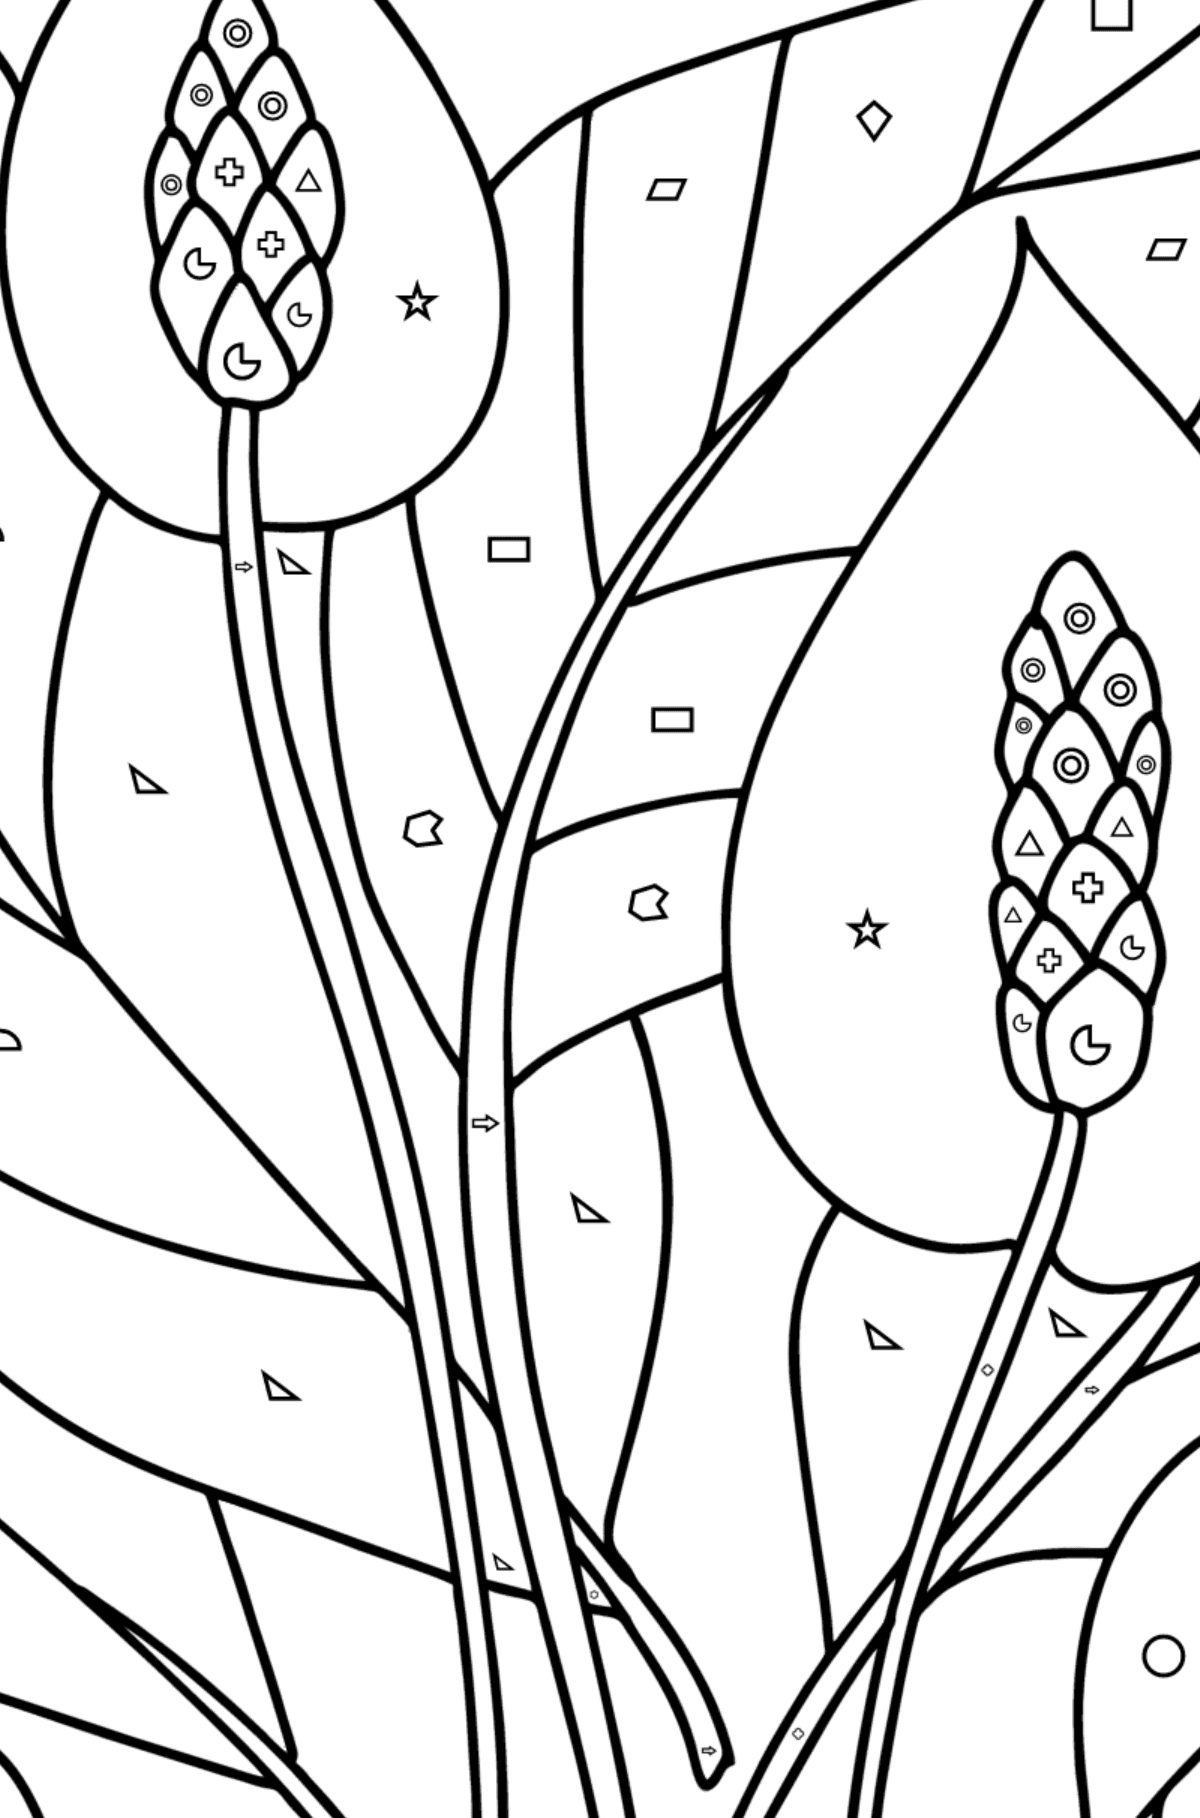 Spathiphyllum coloring page - Coloring by Geometric Shapes for Kids